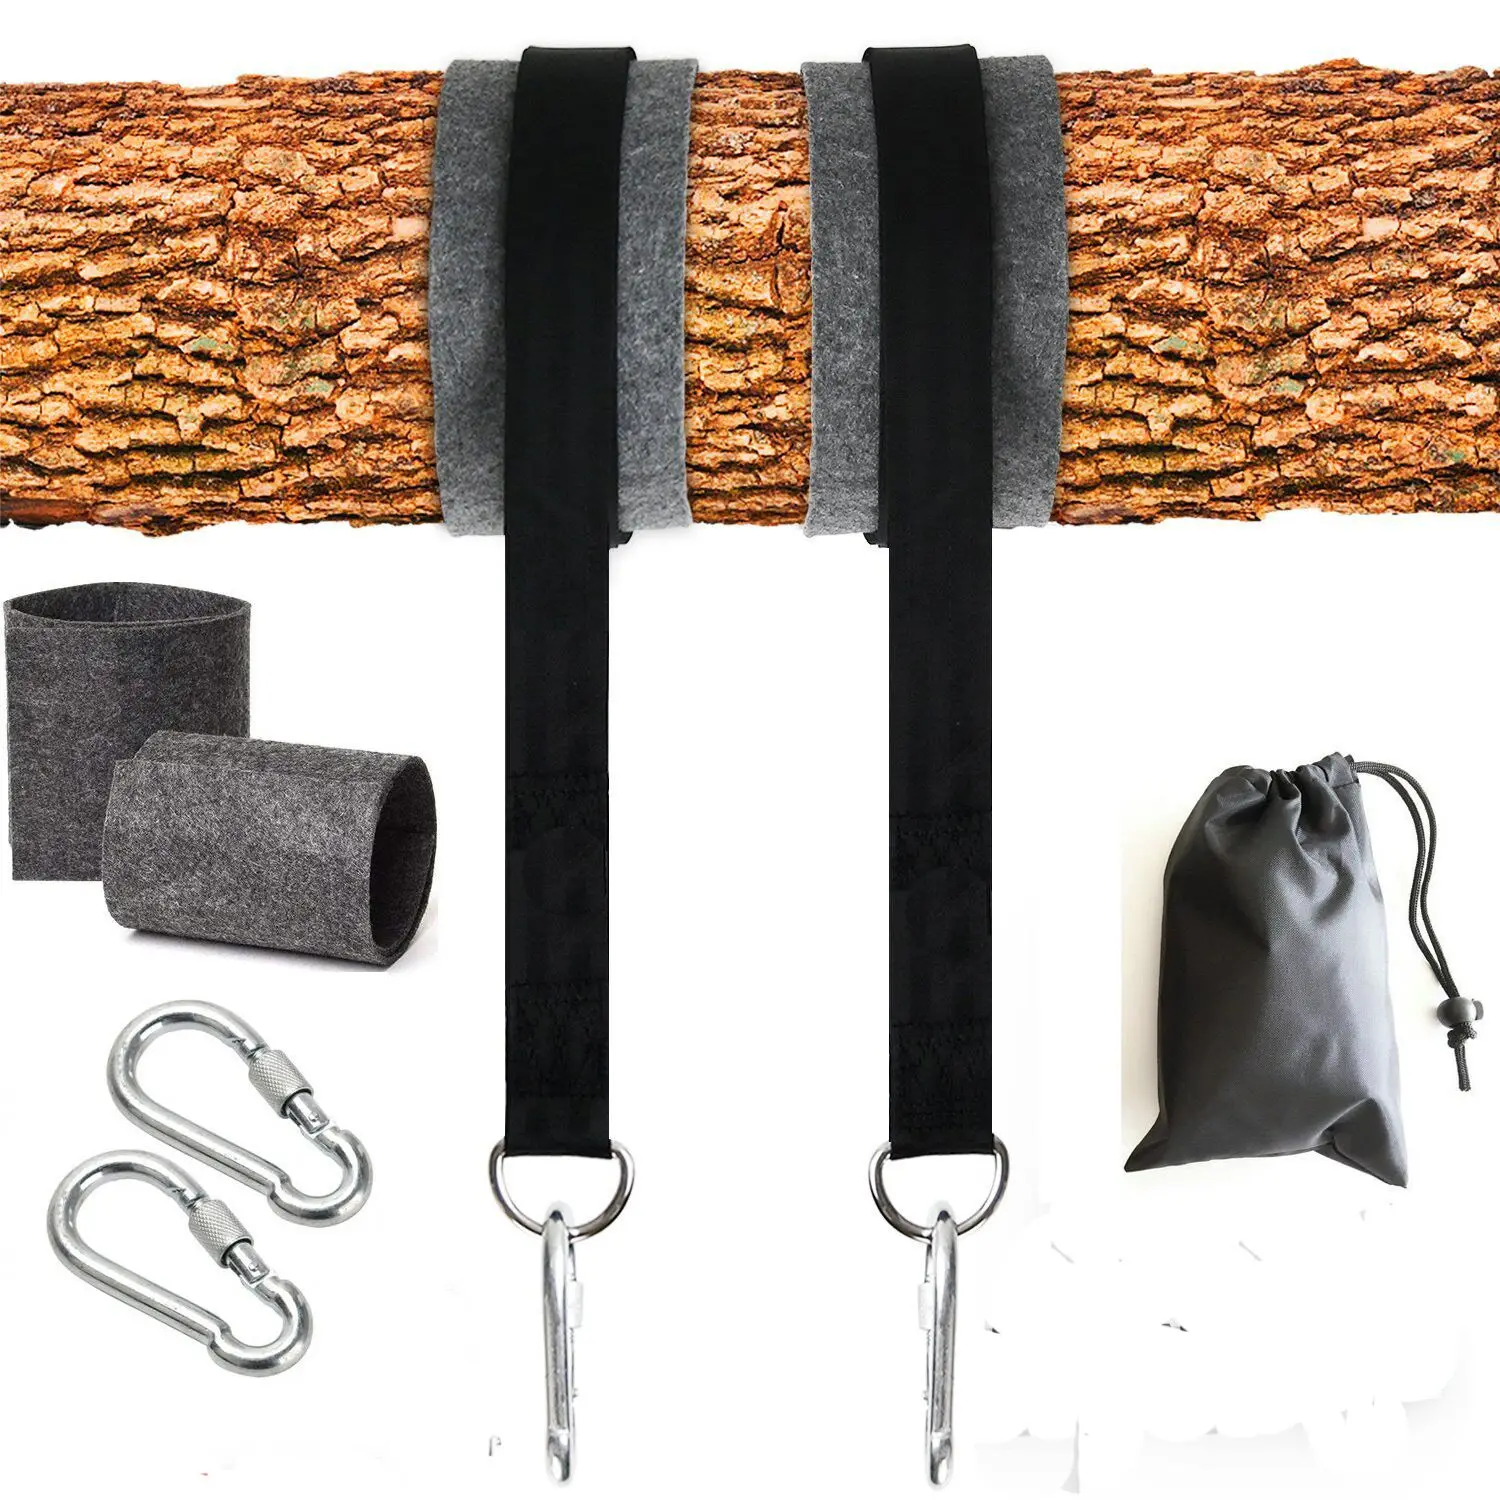 Tree Swing Straps Hanging Kit Holds up 2200lbs High-Strengthened Nylon Hangers 